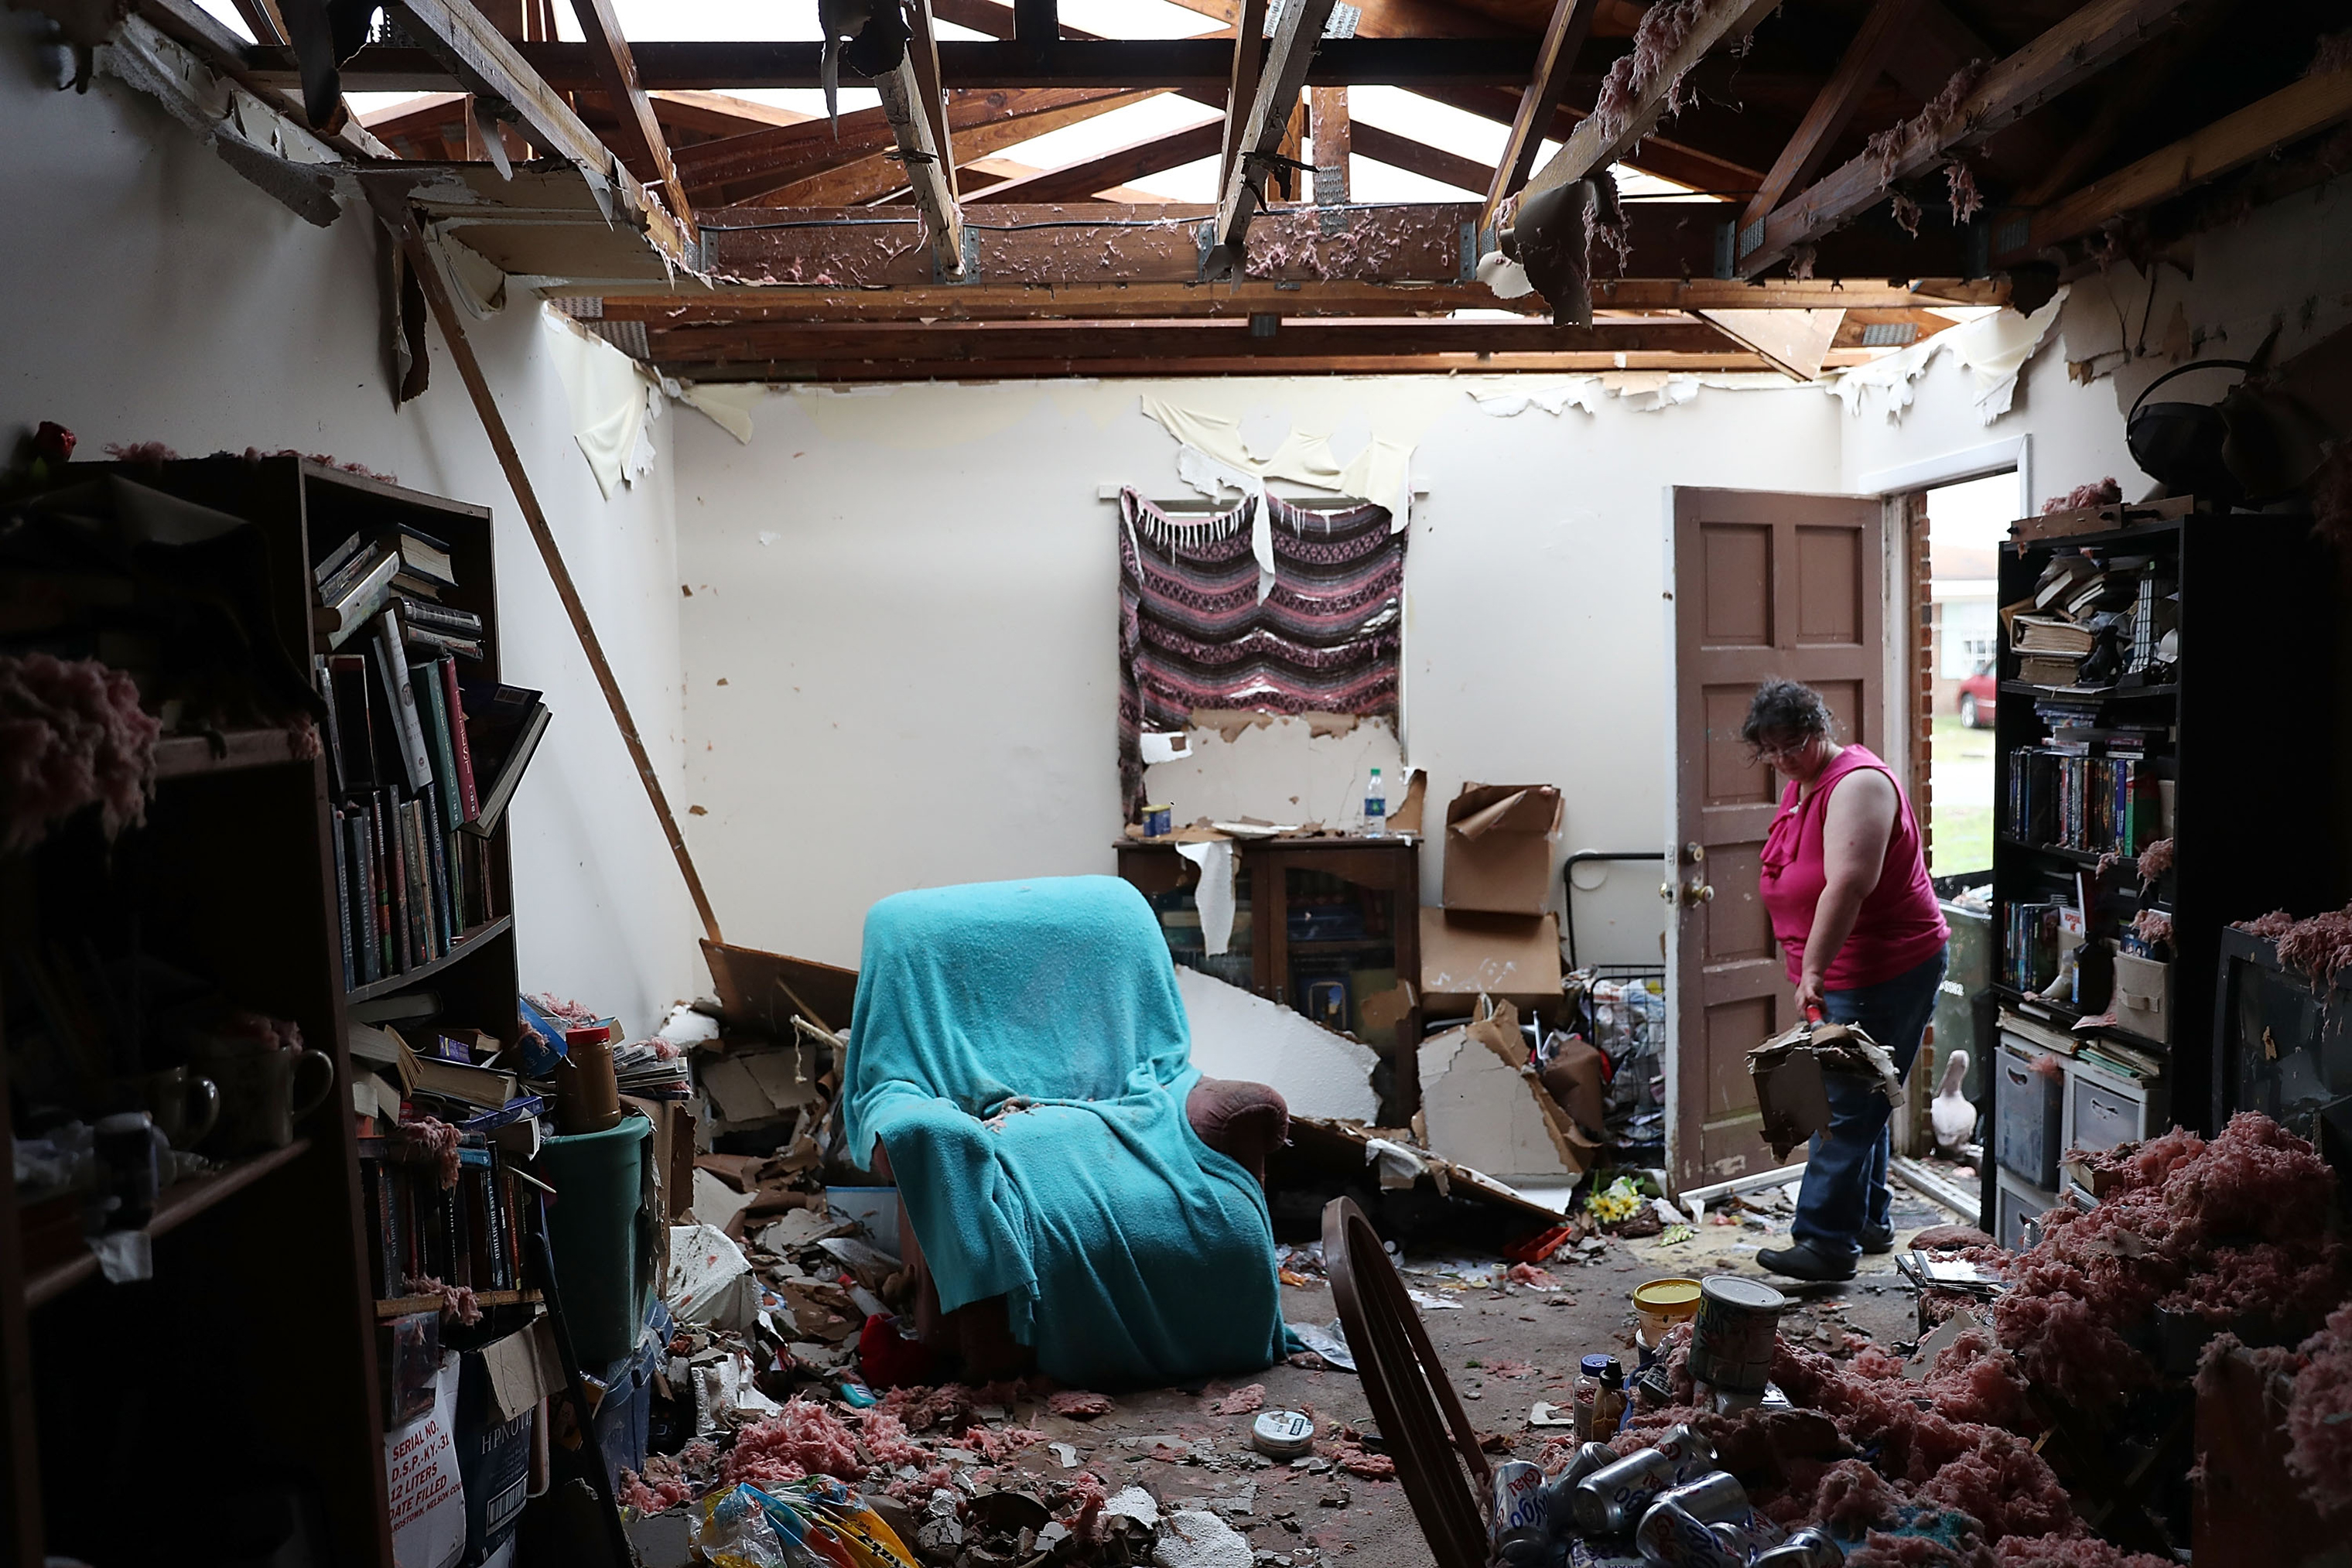 Amanda Logsdon begins the process of trying to clean up her home after the roof was blown off by the passing winds of Hurricane Michael on Oct. 11, 2018 in Panama City, Fla. (Joe Raedle—Getty Images)